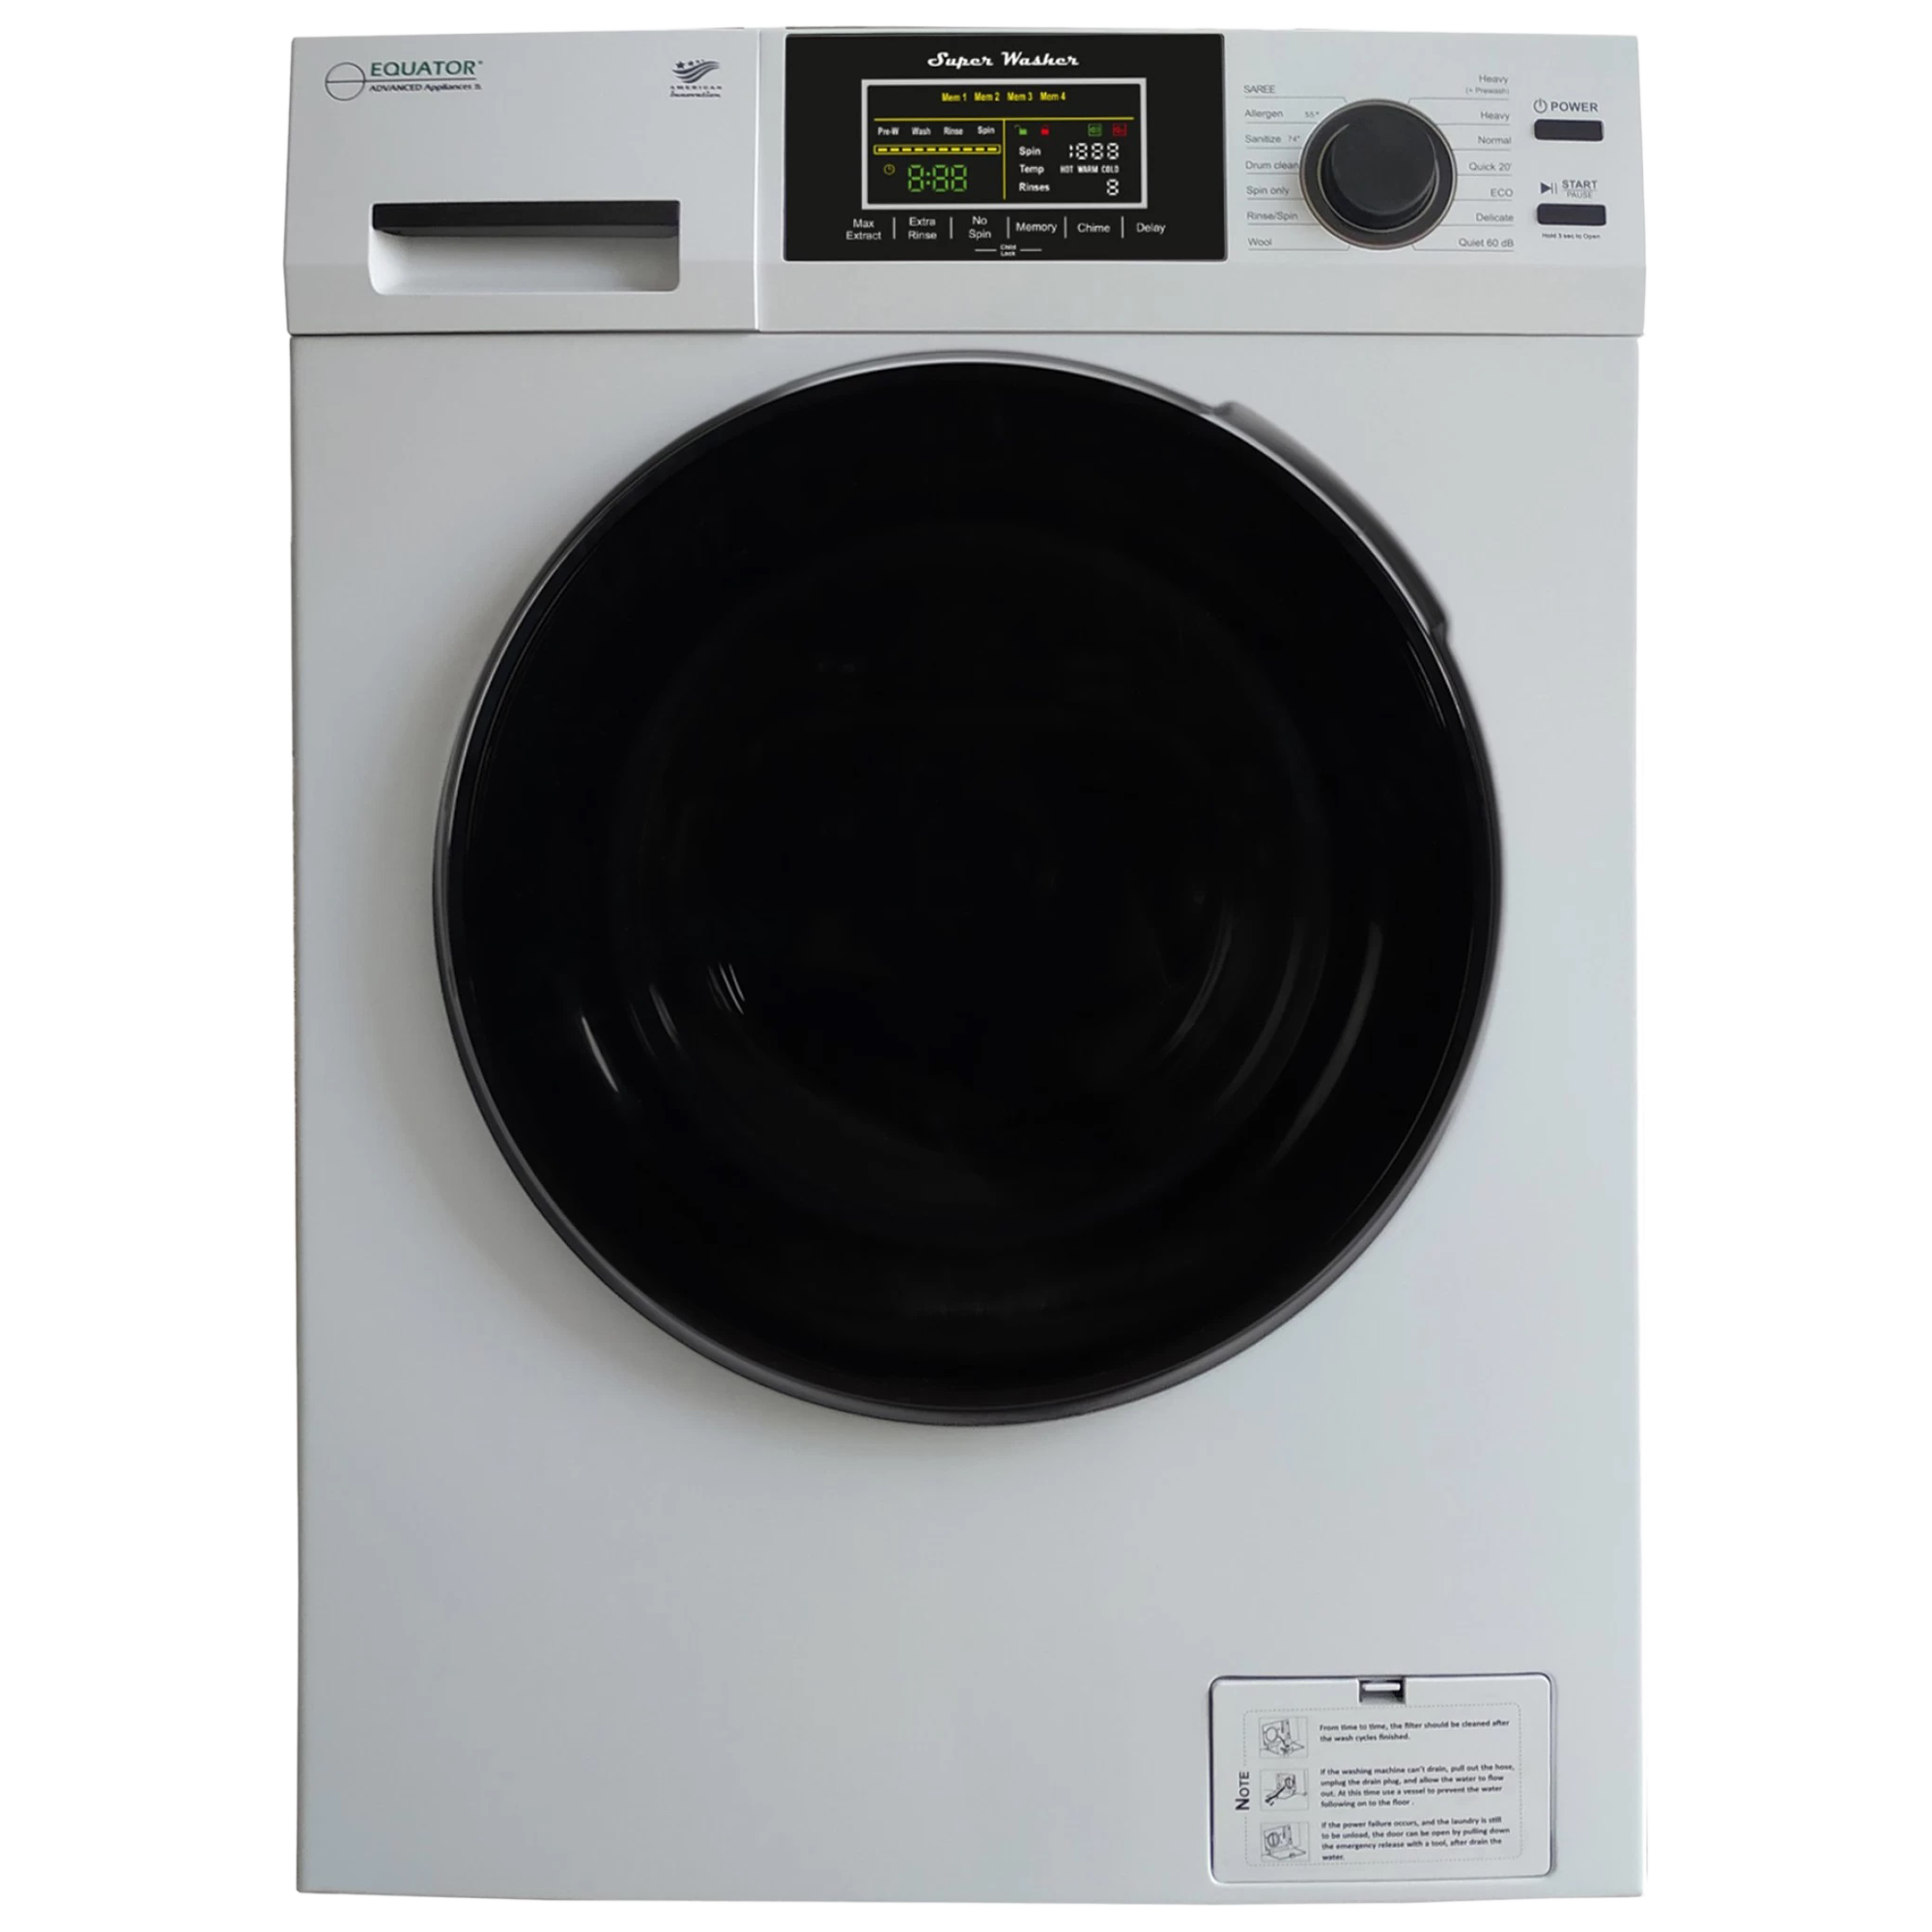 Equator 10.2 kg Fully Automatic Front Load Washing Machine (EW830, In-built Heater, White)_1